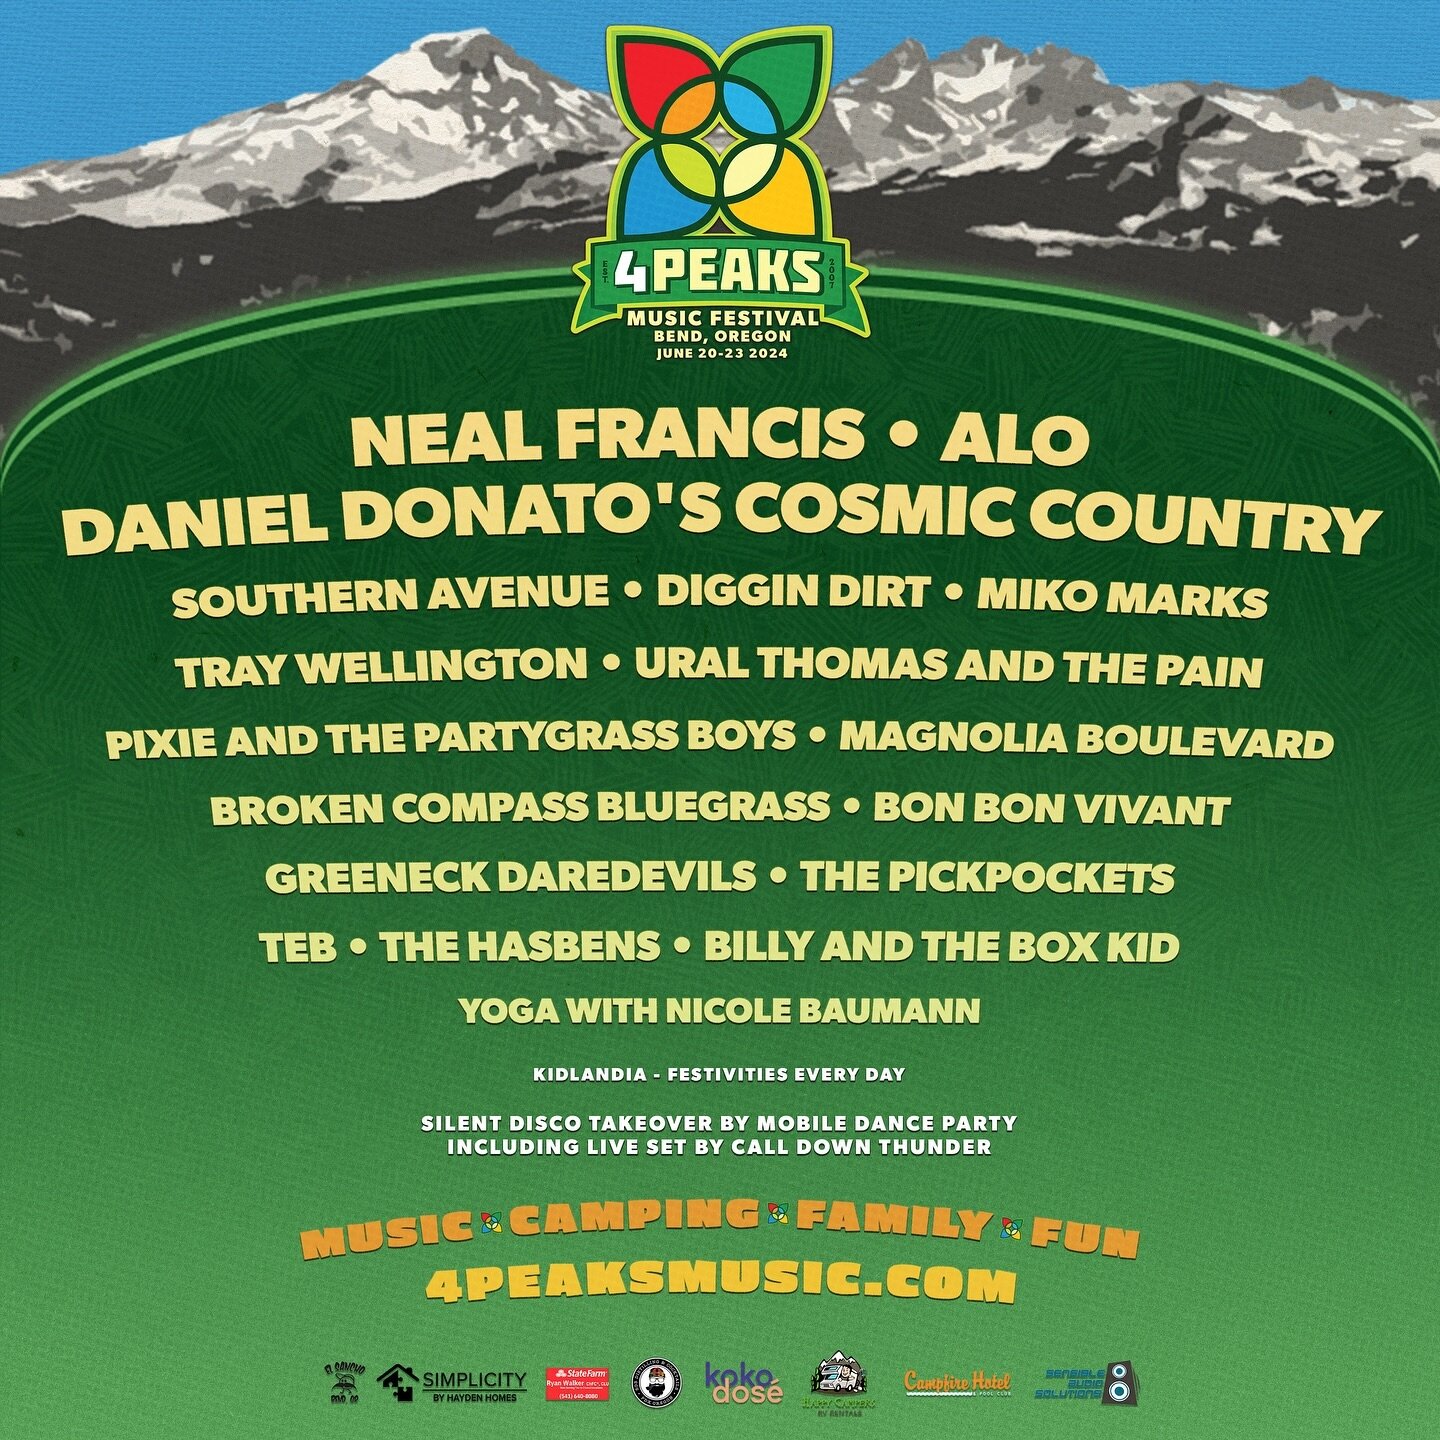 We are thrilled to be a part of this year&rsquo;s @4peaksmusic festival in beautiful Bend, OR over the summer solstice, June 20-23! Tickets are on-sale now at https://4peaksmusic.com/